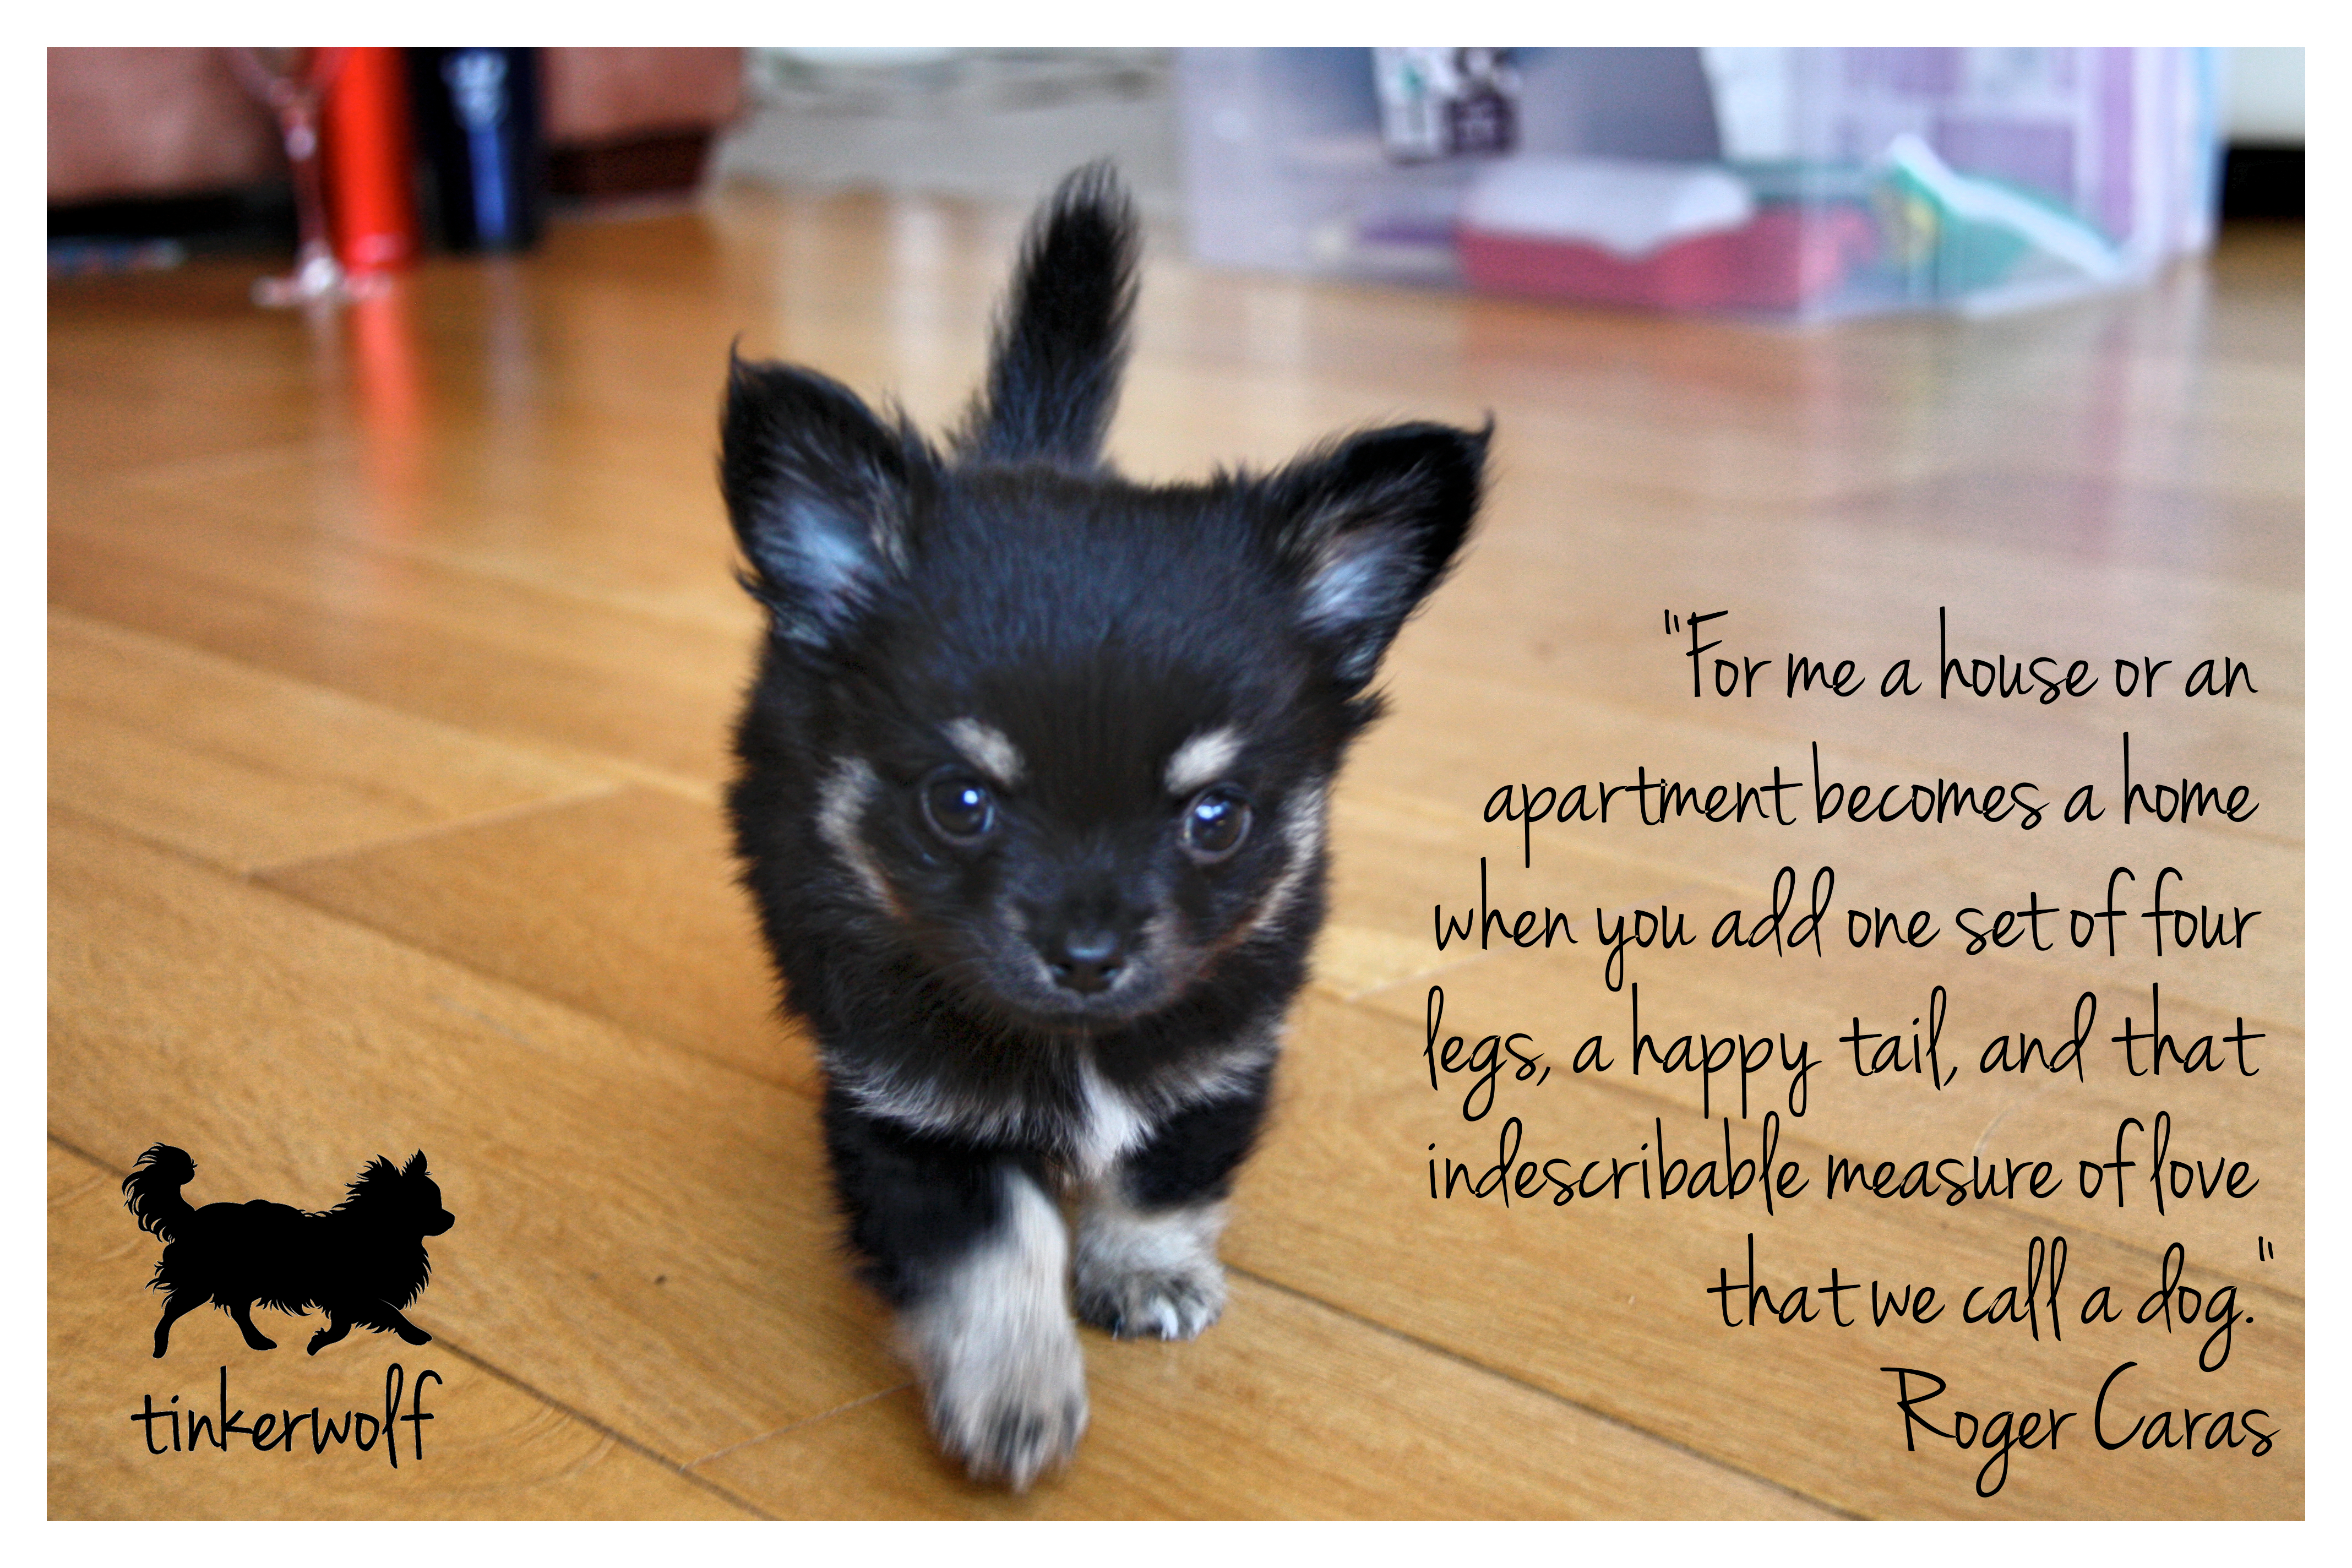 tinkerwolf dog photo quotes 19 A house be es a home “